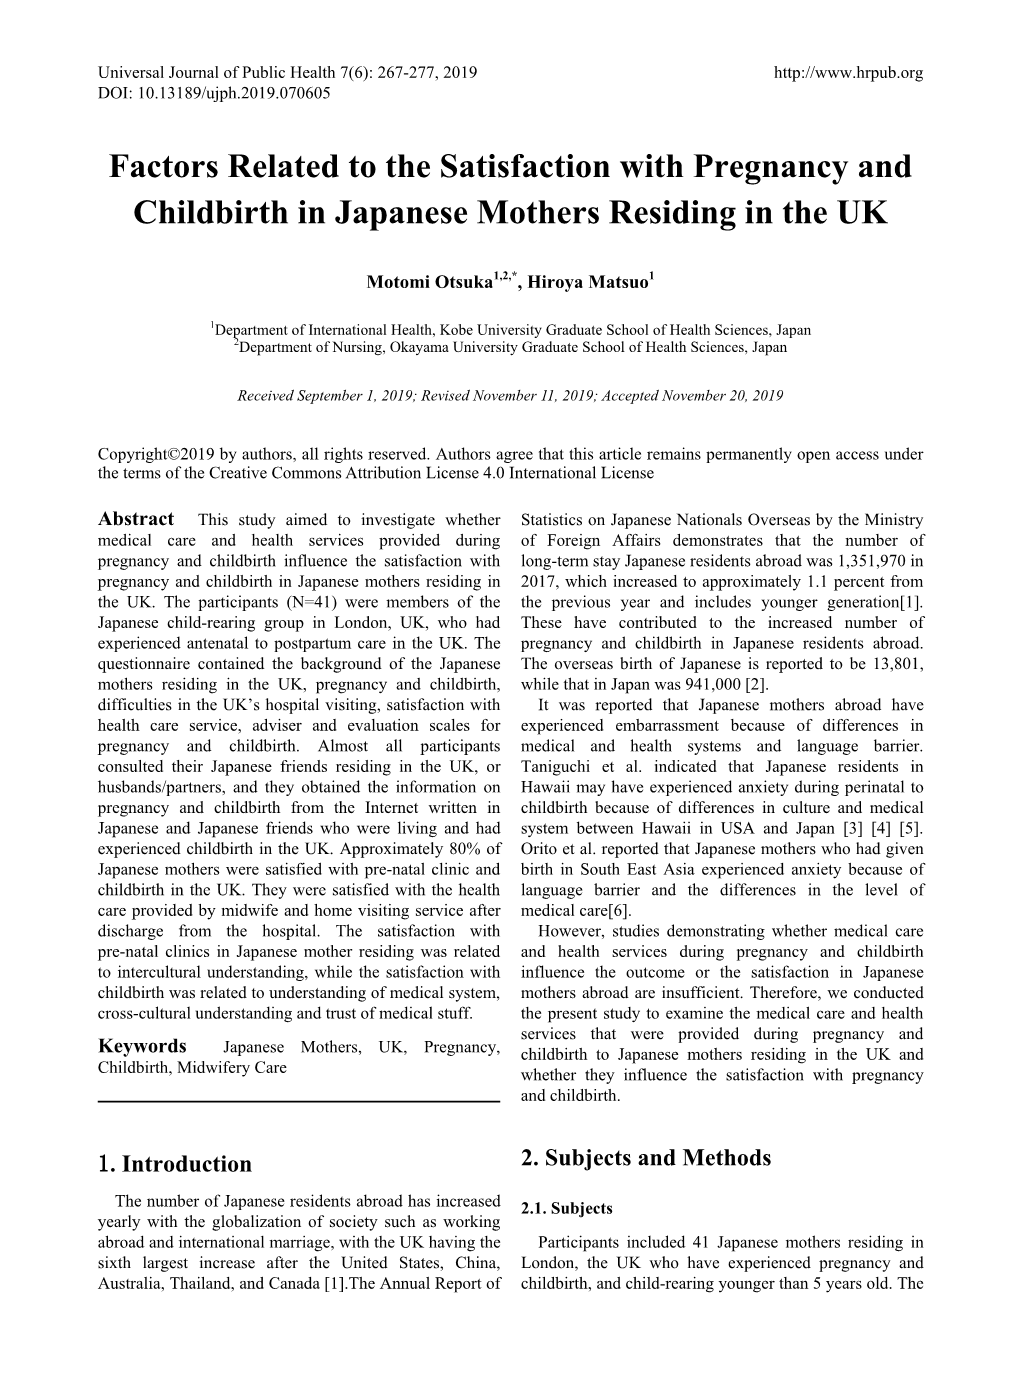 Factors Related to the Satisfaction with Pregnancy and Childbirth in Japanese Mothers Residing in the UK